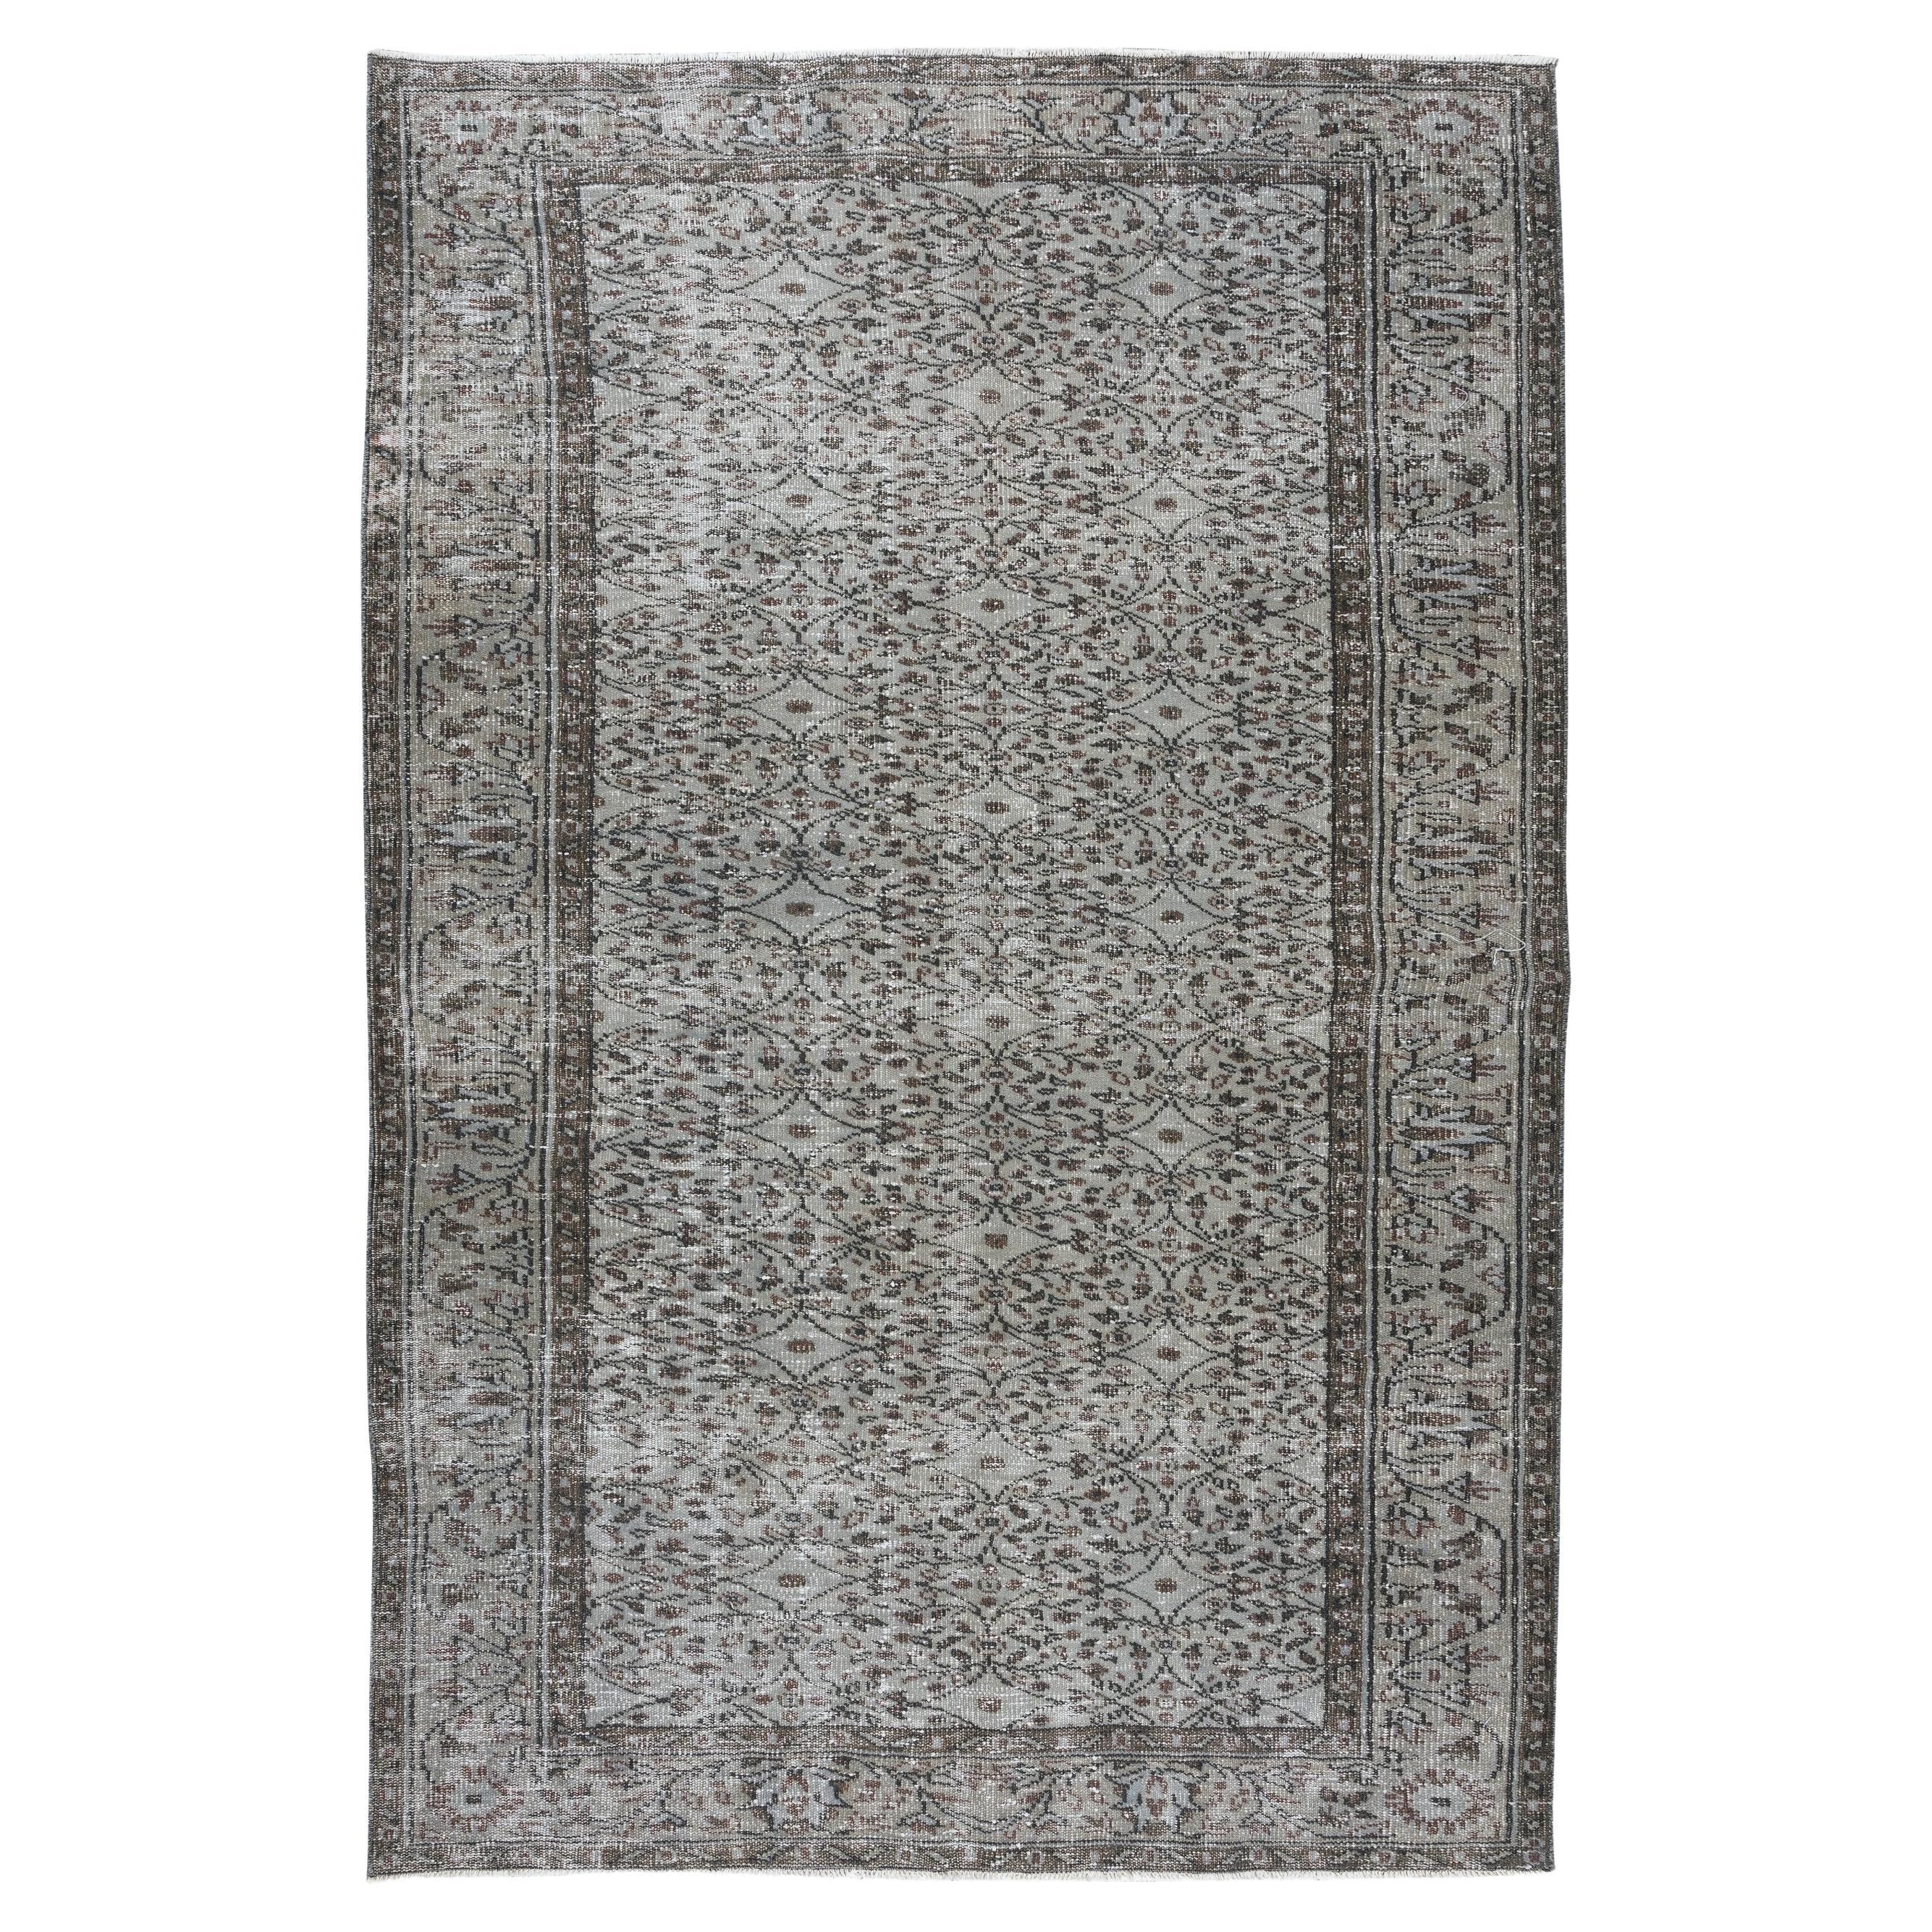 5.5x8.6 Ft Modern Floral Area Rug in Gray, Handmade Upcycled Turkish Wool Carpet For Sale